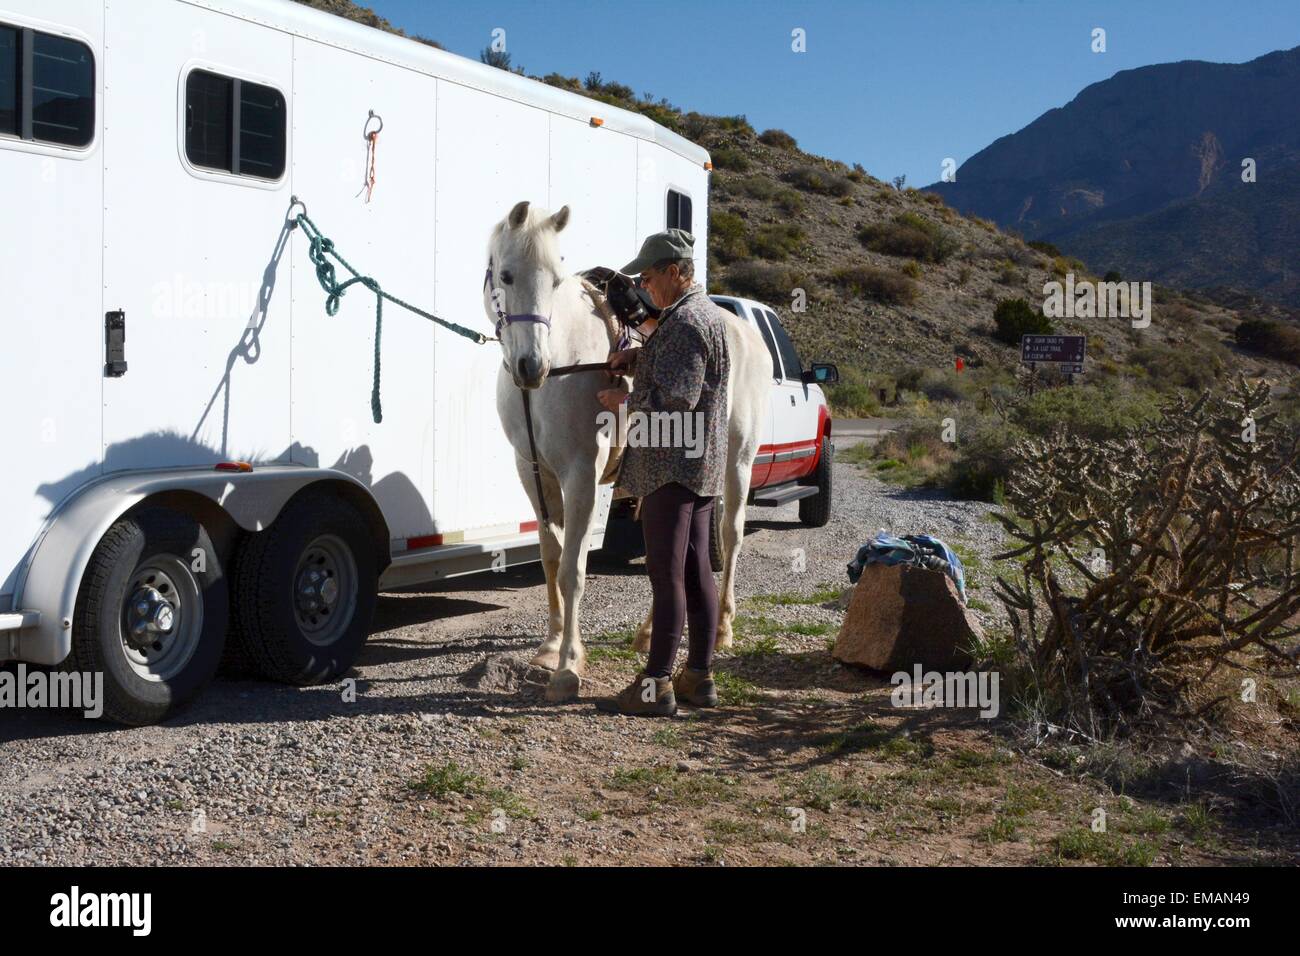 Adjusting the breast collar on my Arabian Horse in preparation for a trail ride. Stock Photo